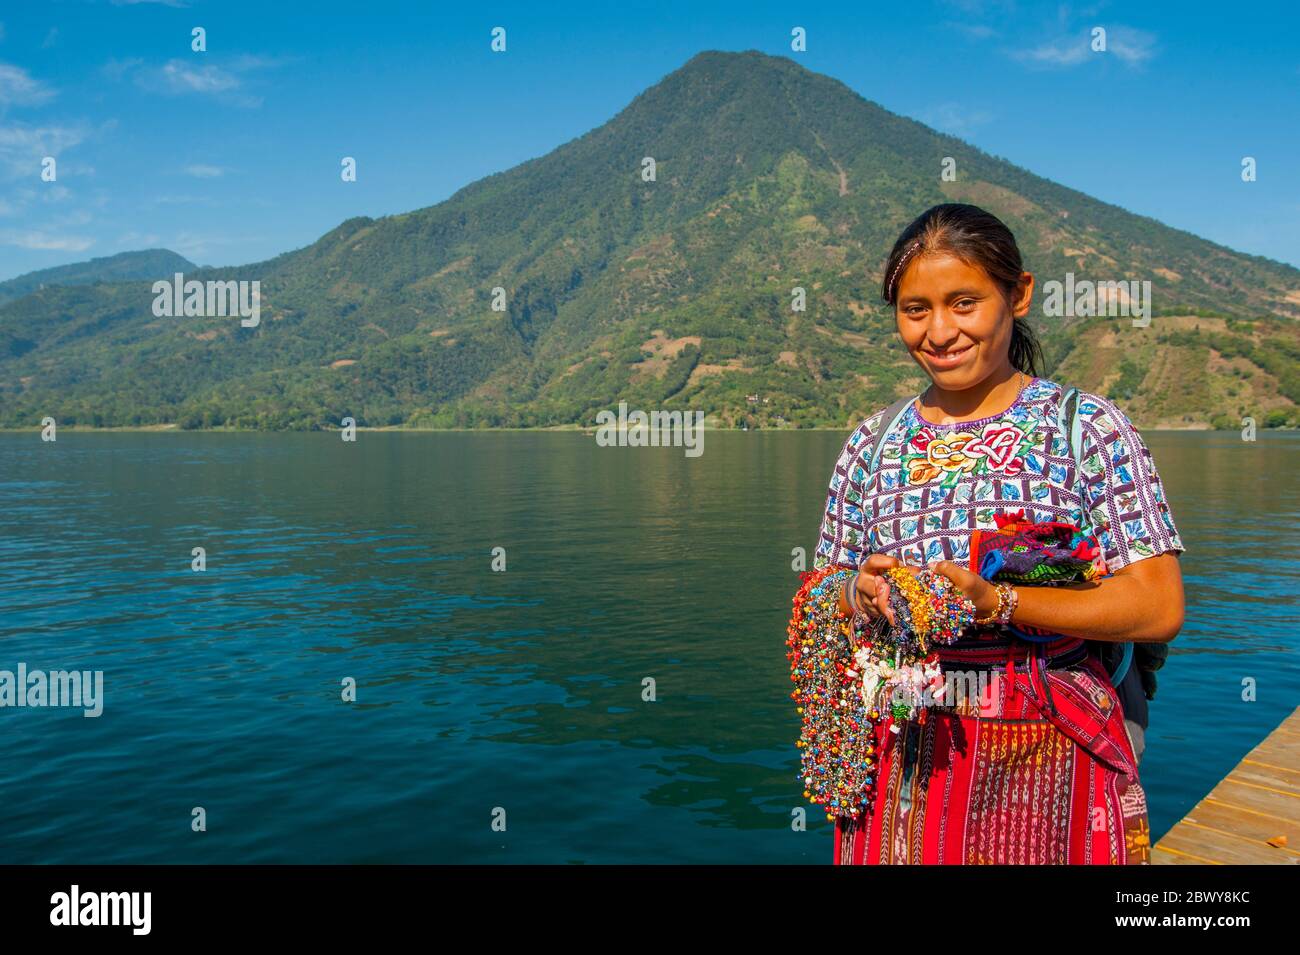 A young Mayan woman at Lake Atitlan with San Pedro Volcano near the town of Santiago in the southwestern highlands of Guatemala. Stock Photo